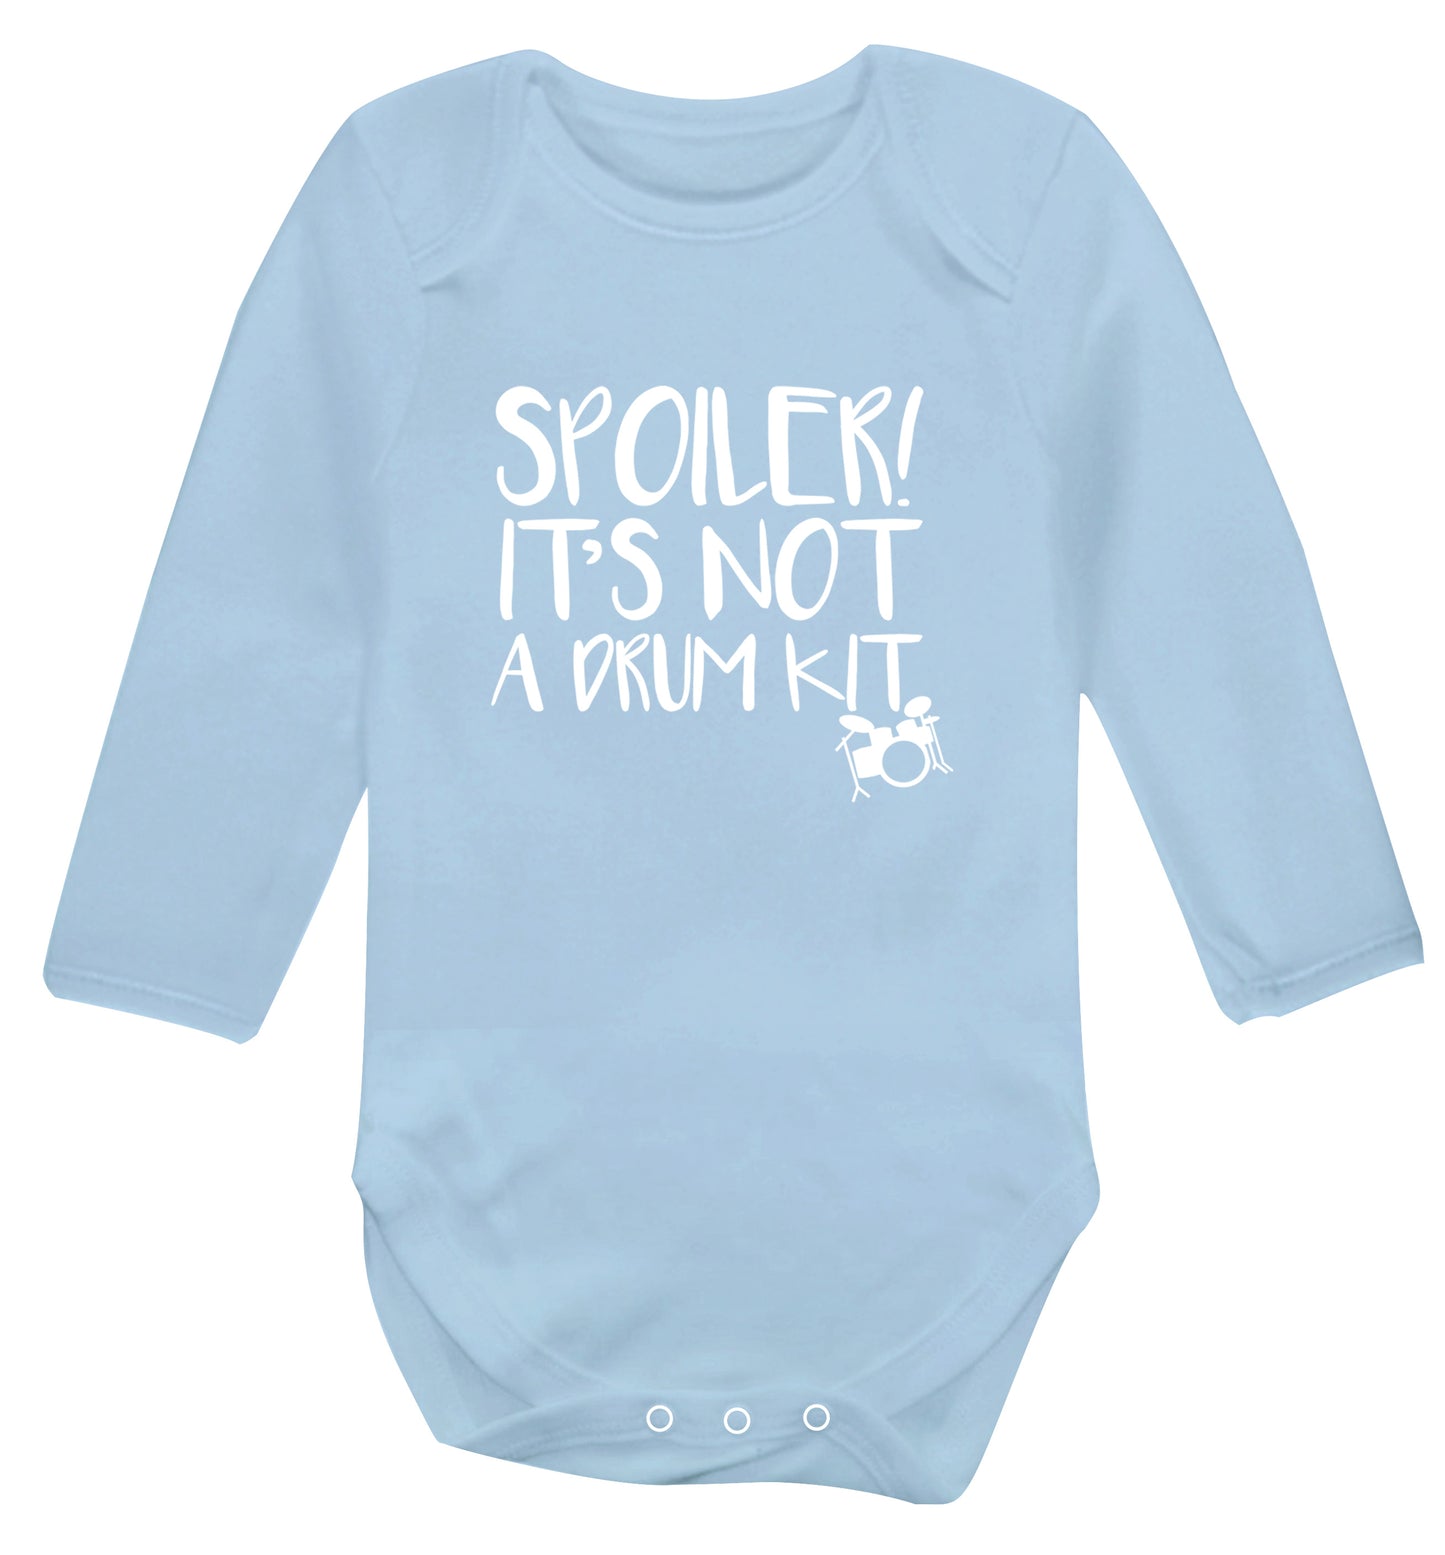 Spoiler it's not a drum kit Baby Vest long sleeved pale blue 6-12 months